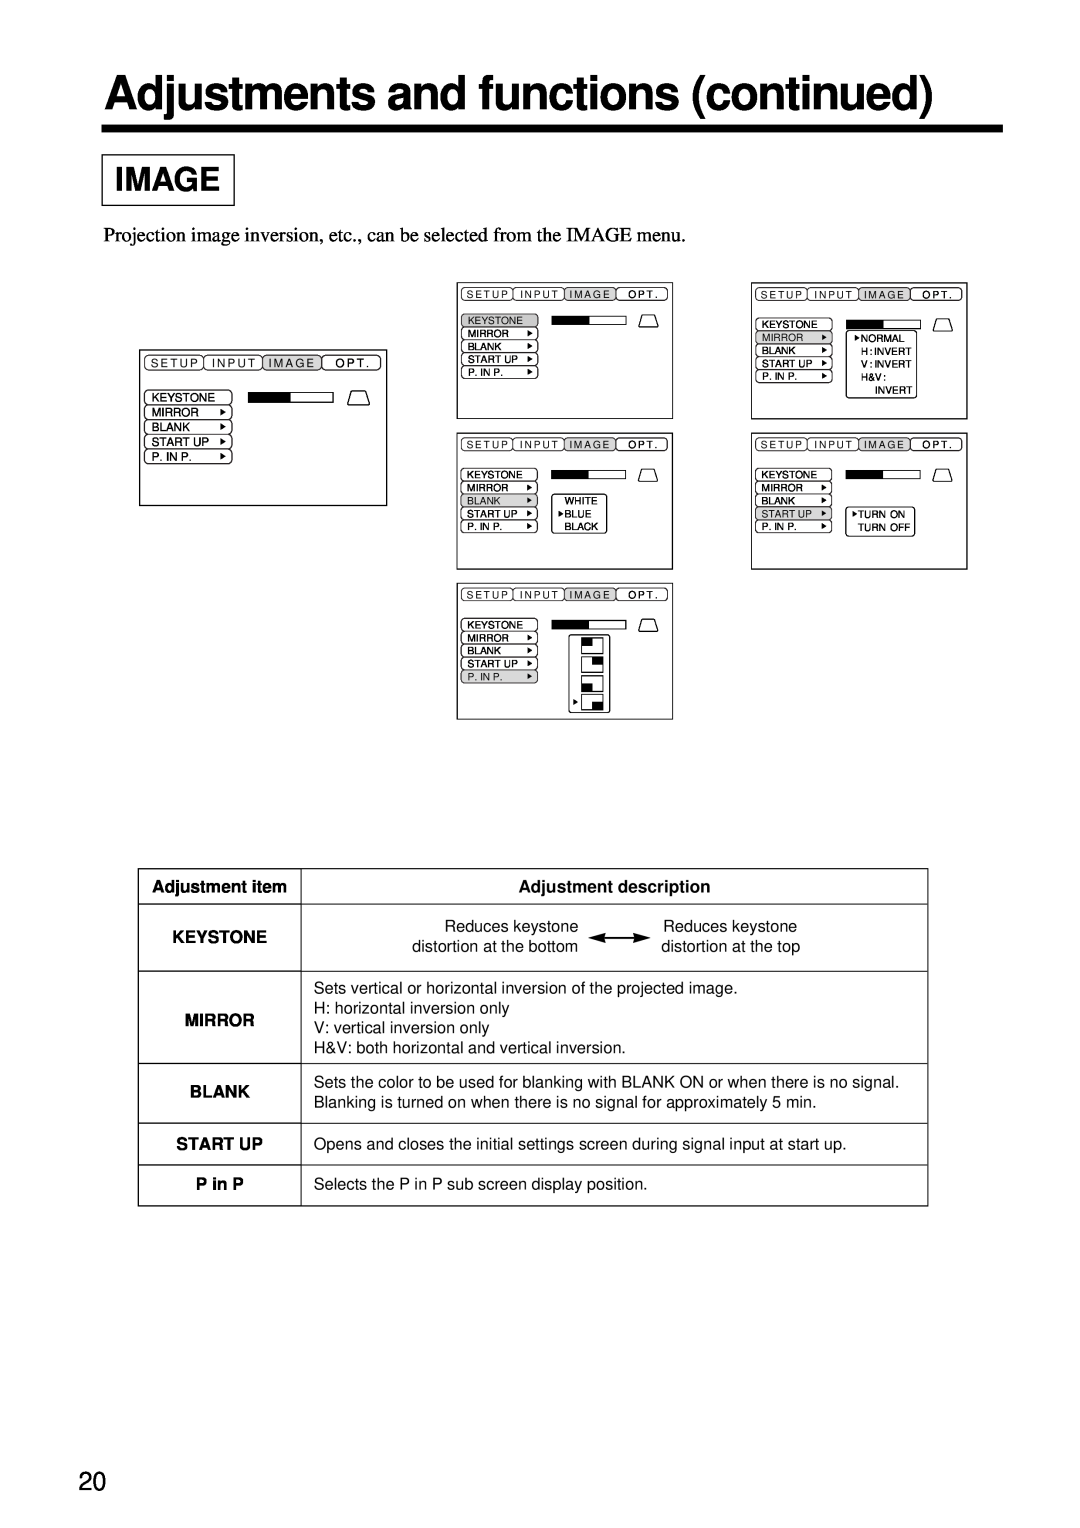 Hitachi CP-S860W user manual Image, Adjustments and functions continued, Mirror, Start Up, P in P 